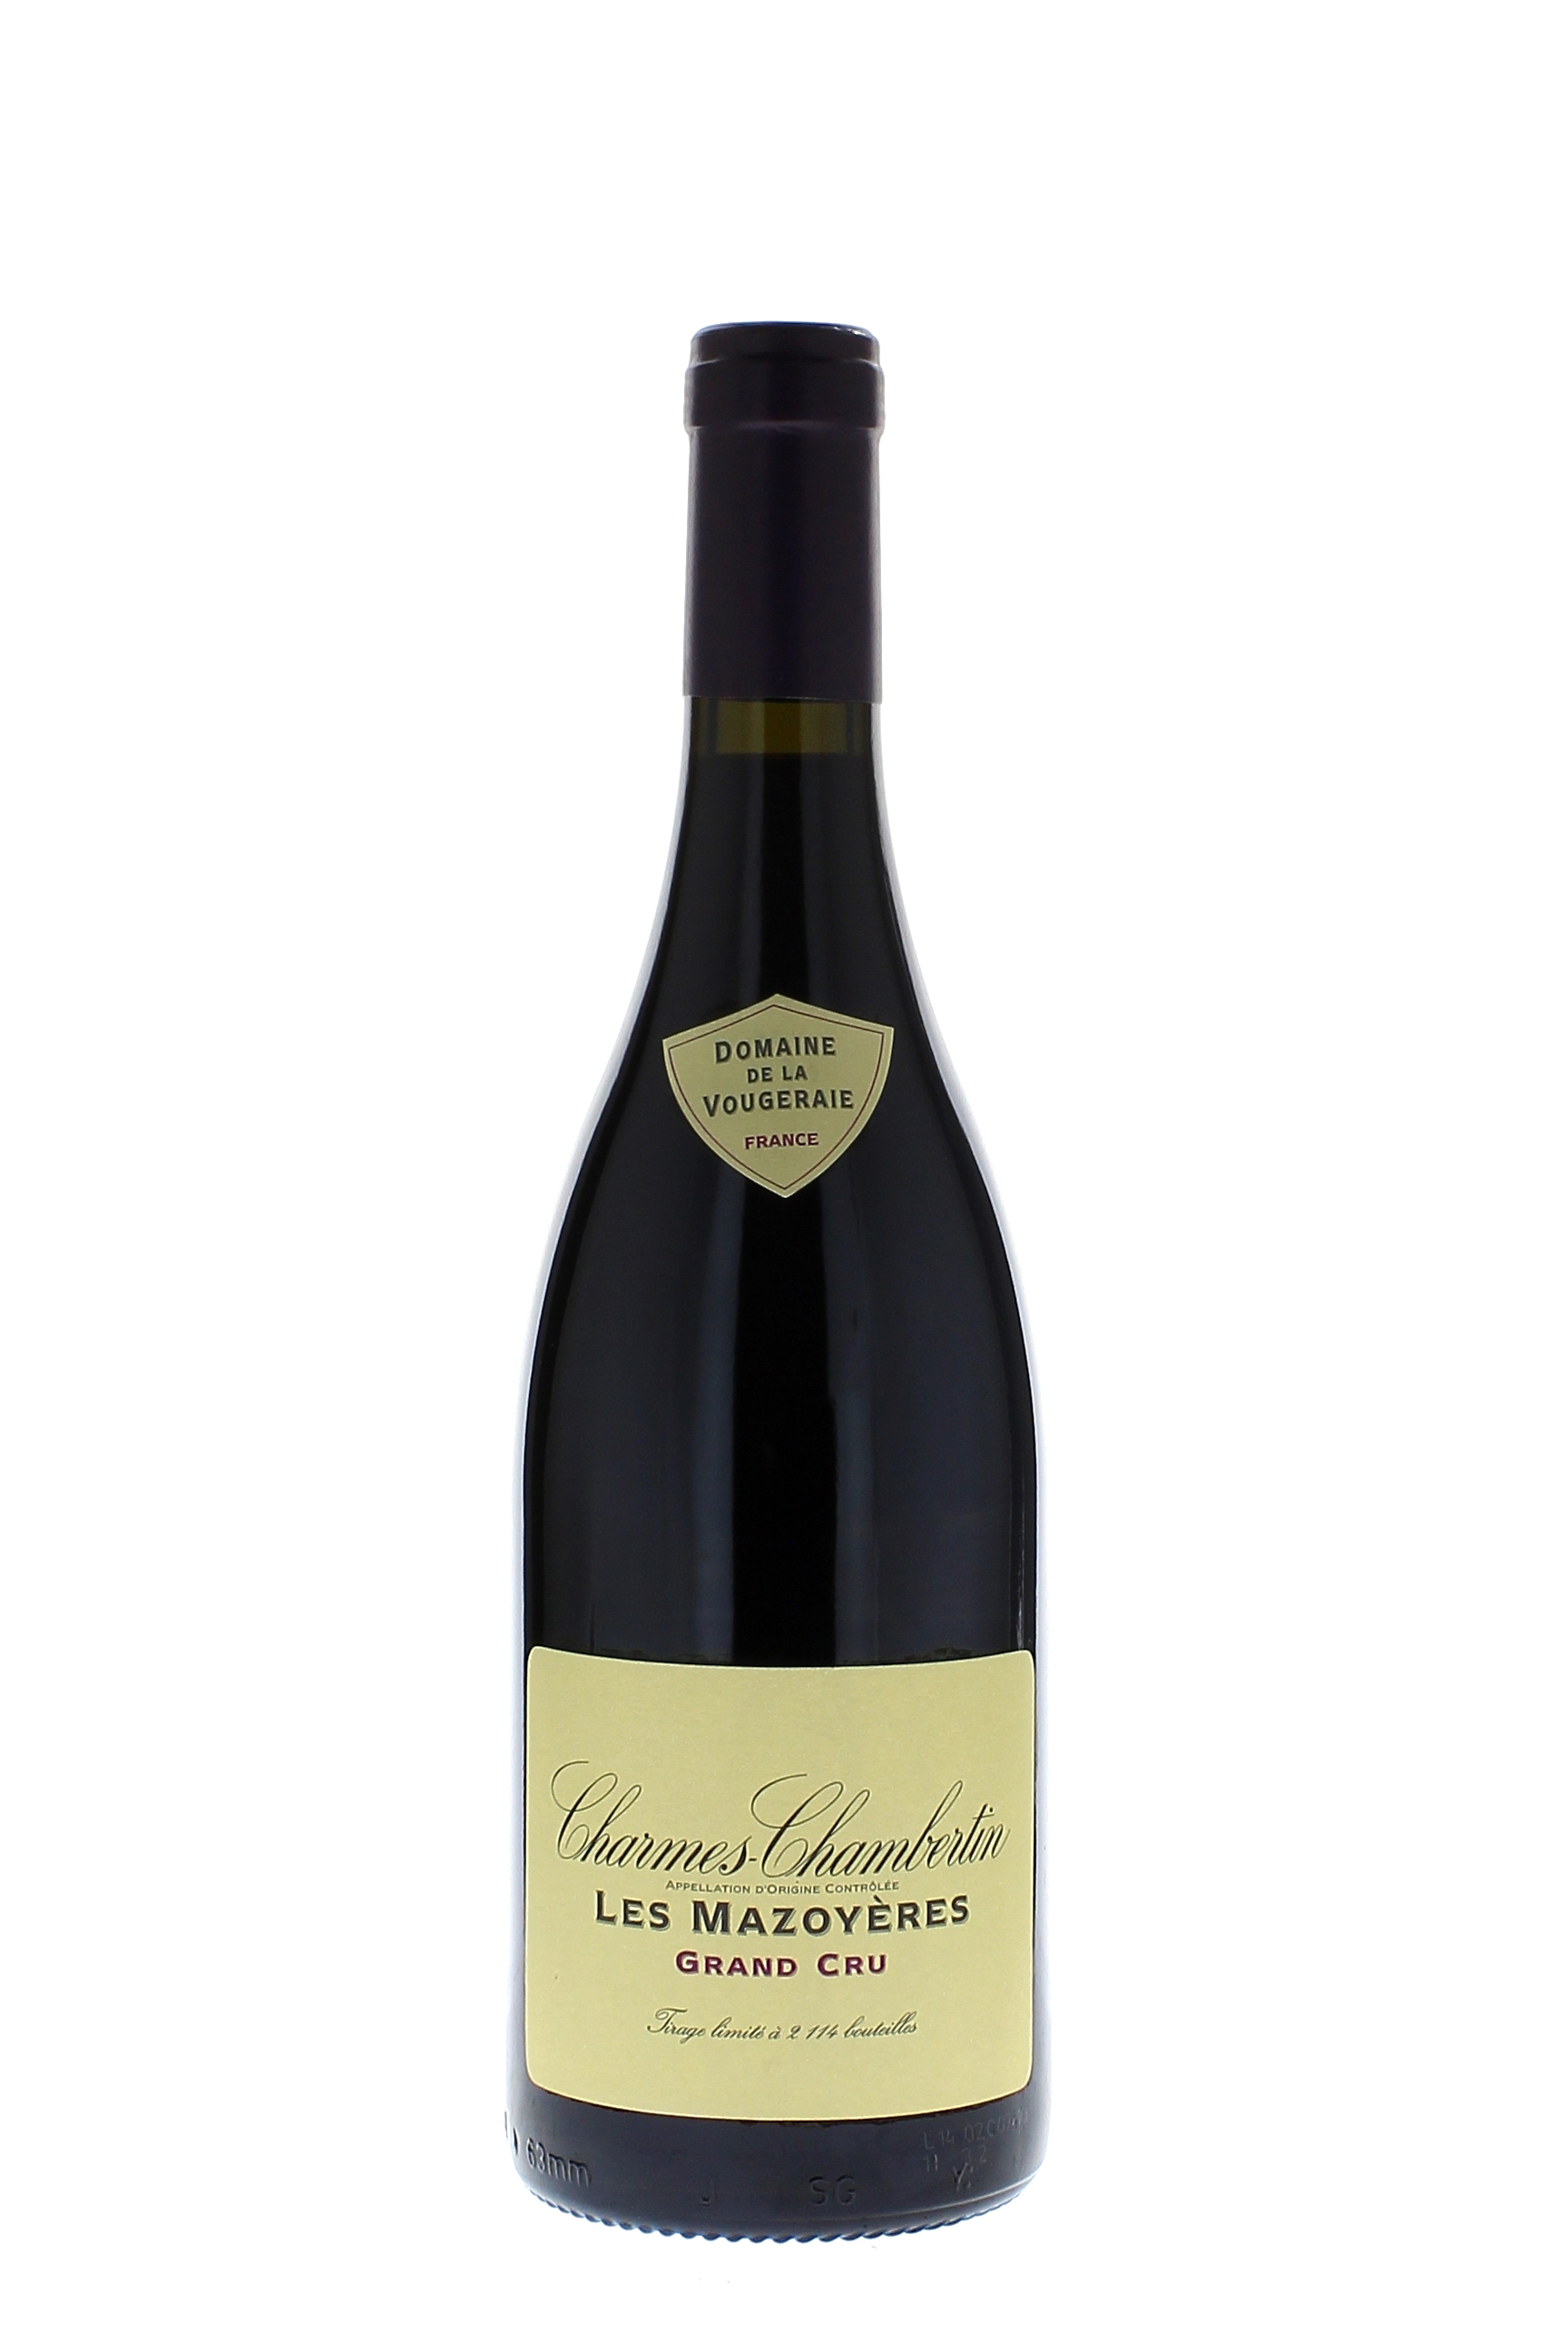 Charmes chambertin les mazoyres 2010 Domaine VOUGERAIE, Bourgogne rouge